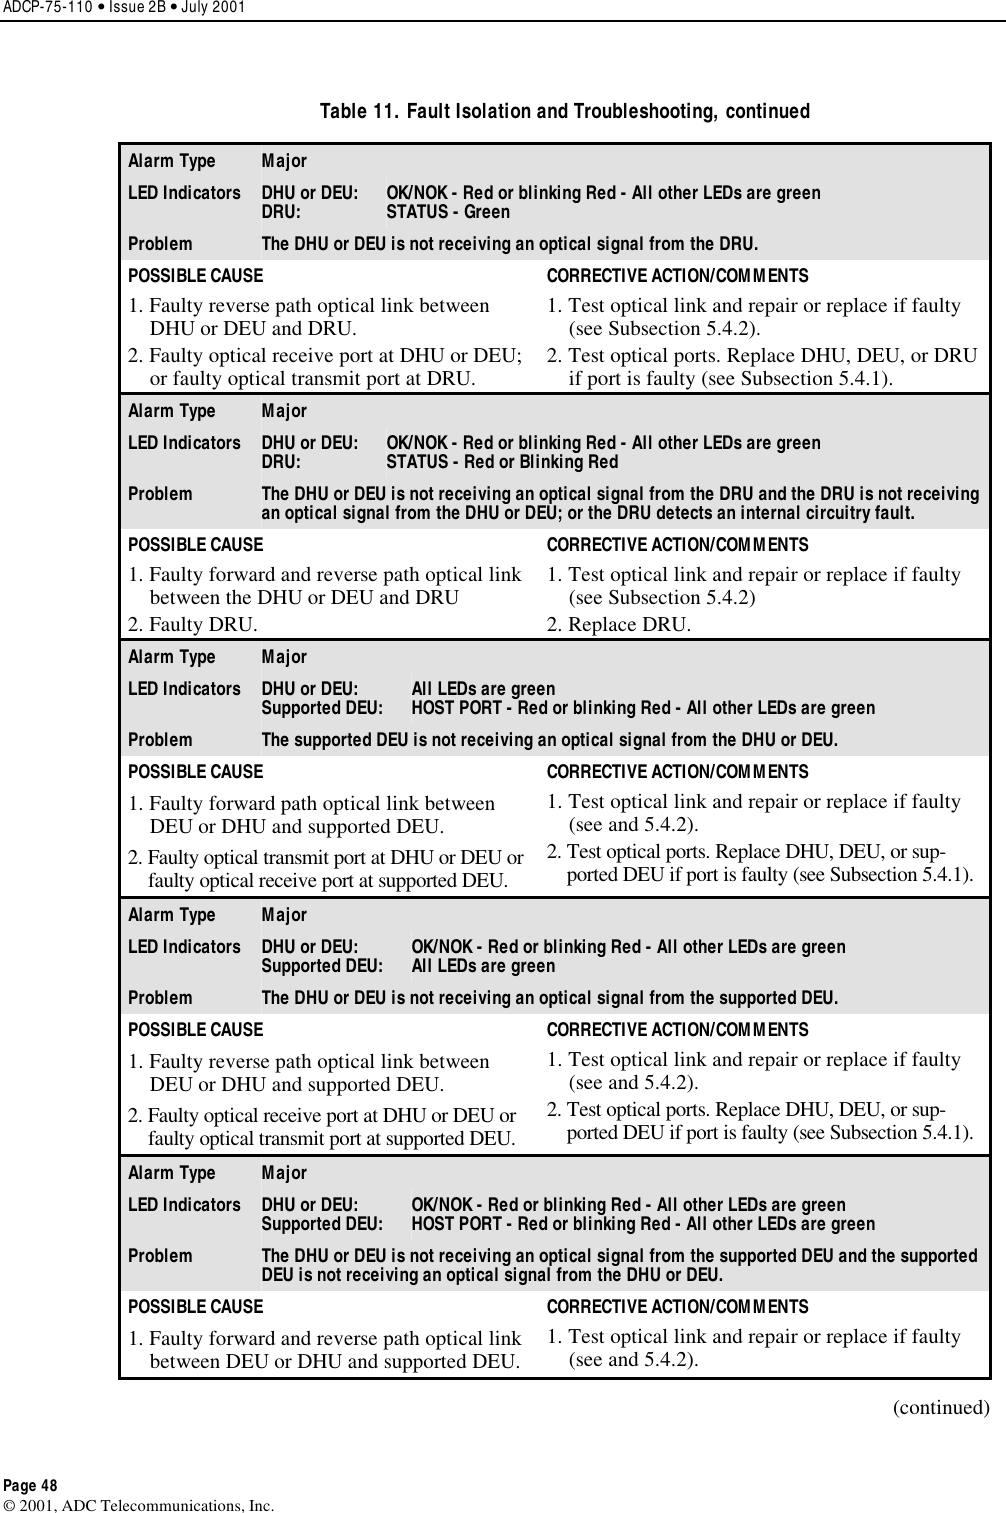 ADCP-75-110 • Issue 2B • July 2001 Page 48 ©2001, ADC Telecommunications, Inc.Table 11. Fault Isolation and Troubleshooting, continued Alarm Type  Major  LED Indicators  DHU or DEU: DRU:  OK/NOK - Red or blinking Red - All other LEDs are green STATUS - Green Problem  The DHU or DEU is not receiving an optical signal from the DRU.  POSSIBLE CAUSE  CORRECTIVE ACTION/COMMENTS 1. Faulty reverse path optical link betweenDHU or DEU and DRU.2. Faulty optical receive port at DHU or DEU;or faulty optical transmit port at DRU.1. Test optical link and repair or replace if faulty(see Subsection 5.4.2).2. Test optical ports. Replace DHU, DEU, or DRUif port is faulty (see Subsection 5.4.1).Alarm Type  Major  LED Indicators  DHU or DEU: DRU:  OK/NOK - Red or blinking Red - All other LEDs are green STATUS - Red or Blinking Red Problem  The DHU or DEU is not receiving an optical signal from the DRU and the DRU is not receiving an optical signal from the DHU or DEU; or the DRU detects an internal circuitry fault.  POSSIBLE CAUSE  CORRECTIVE ACTION/COMMENTS 1. Faulty forward and reverse path optical linkbetween the DHU or DEU and DRU2. Faulty DRU.1. Test optical link and repair or replace if faulty(see Subsection 5.4.2)2. Replace DRU.Alarm Type  Major  LED Indicators   DHU or DEU: Supported DEU:  All LEDs are green HOST PORT - Red or blinking Red - All other LEDs are green Problem  The supported DEU is not receiving an optical signal from the DHU or DEU.  POSSIBLE CAUSE  CORRECTIVE ACTION/COMMENTS 1. Faulty forward path optical link betweenDEU or DHU and supported DEU.2. Faulty optical transmit port at DHU or DEU orfaulty optical receive port at supported DEU.1. Test optical link and repair or replace if faulty(see and 5.4.2).2. Test optical ports. Replace DHU, DEU, or sup-ported DEU if port is faulty (see Subsection 5.4.1).Alarm Type  Major  LED Indicators  DHU or DEU: Supported DEU:  OK/NOK - Red or blinking Red - All other LEDs are green All LEDs are green Problem  The DHU or DEU is not receiving an optical signal from the supported DEU.  POSSIBLE CAUSE  CORRECTIVE ACTION/COMMENTS 1. Faulty reverse path optical link betweenDEU or DHU and supported DEU.2. Faulty optical receive port at DHU or DEU orfaulty optical transmit port at supported DEU.1. Test optical link and repair or replace if faulty(see and 5.4.2).2. Test optical ports. Replace DHU, DEU, or sup-ported DEU if port is faulty (see Subsection 5.4.1).Alarm Type  Major  LED Indicators  DHU or DEU: Supported DEU:  OK/NOK - Red or blinking Red - All other LEDs are green HOST PORT - Red or blinking Red - All other LEDs are green Problem  The DHU or DEU is not receiving an optical signal from the supported DEU and the supported DEU is not receiving an optical signal from the DHU or DEU.  POSSIBLE CAUSE  CORRECTIVE ACTION/COMMENTS 1. Faulty forward and reverse path optical linkbetween DEU or DHU and supported DEU. 1. Test optical link and repair or replace if faulty(see and 5.4.2).(continued)